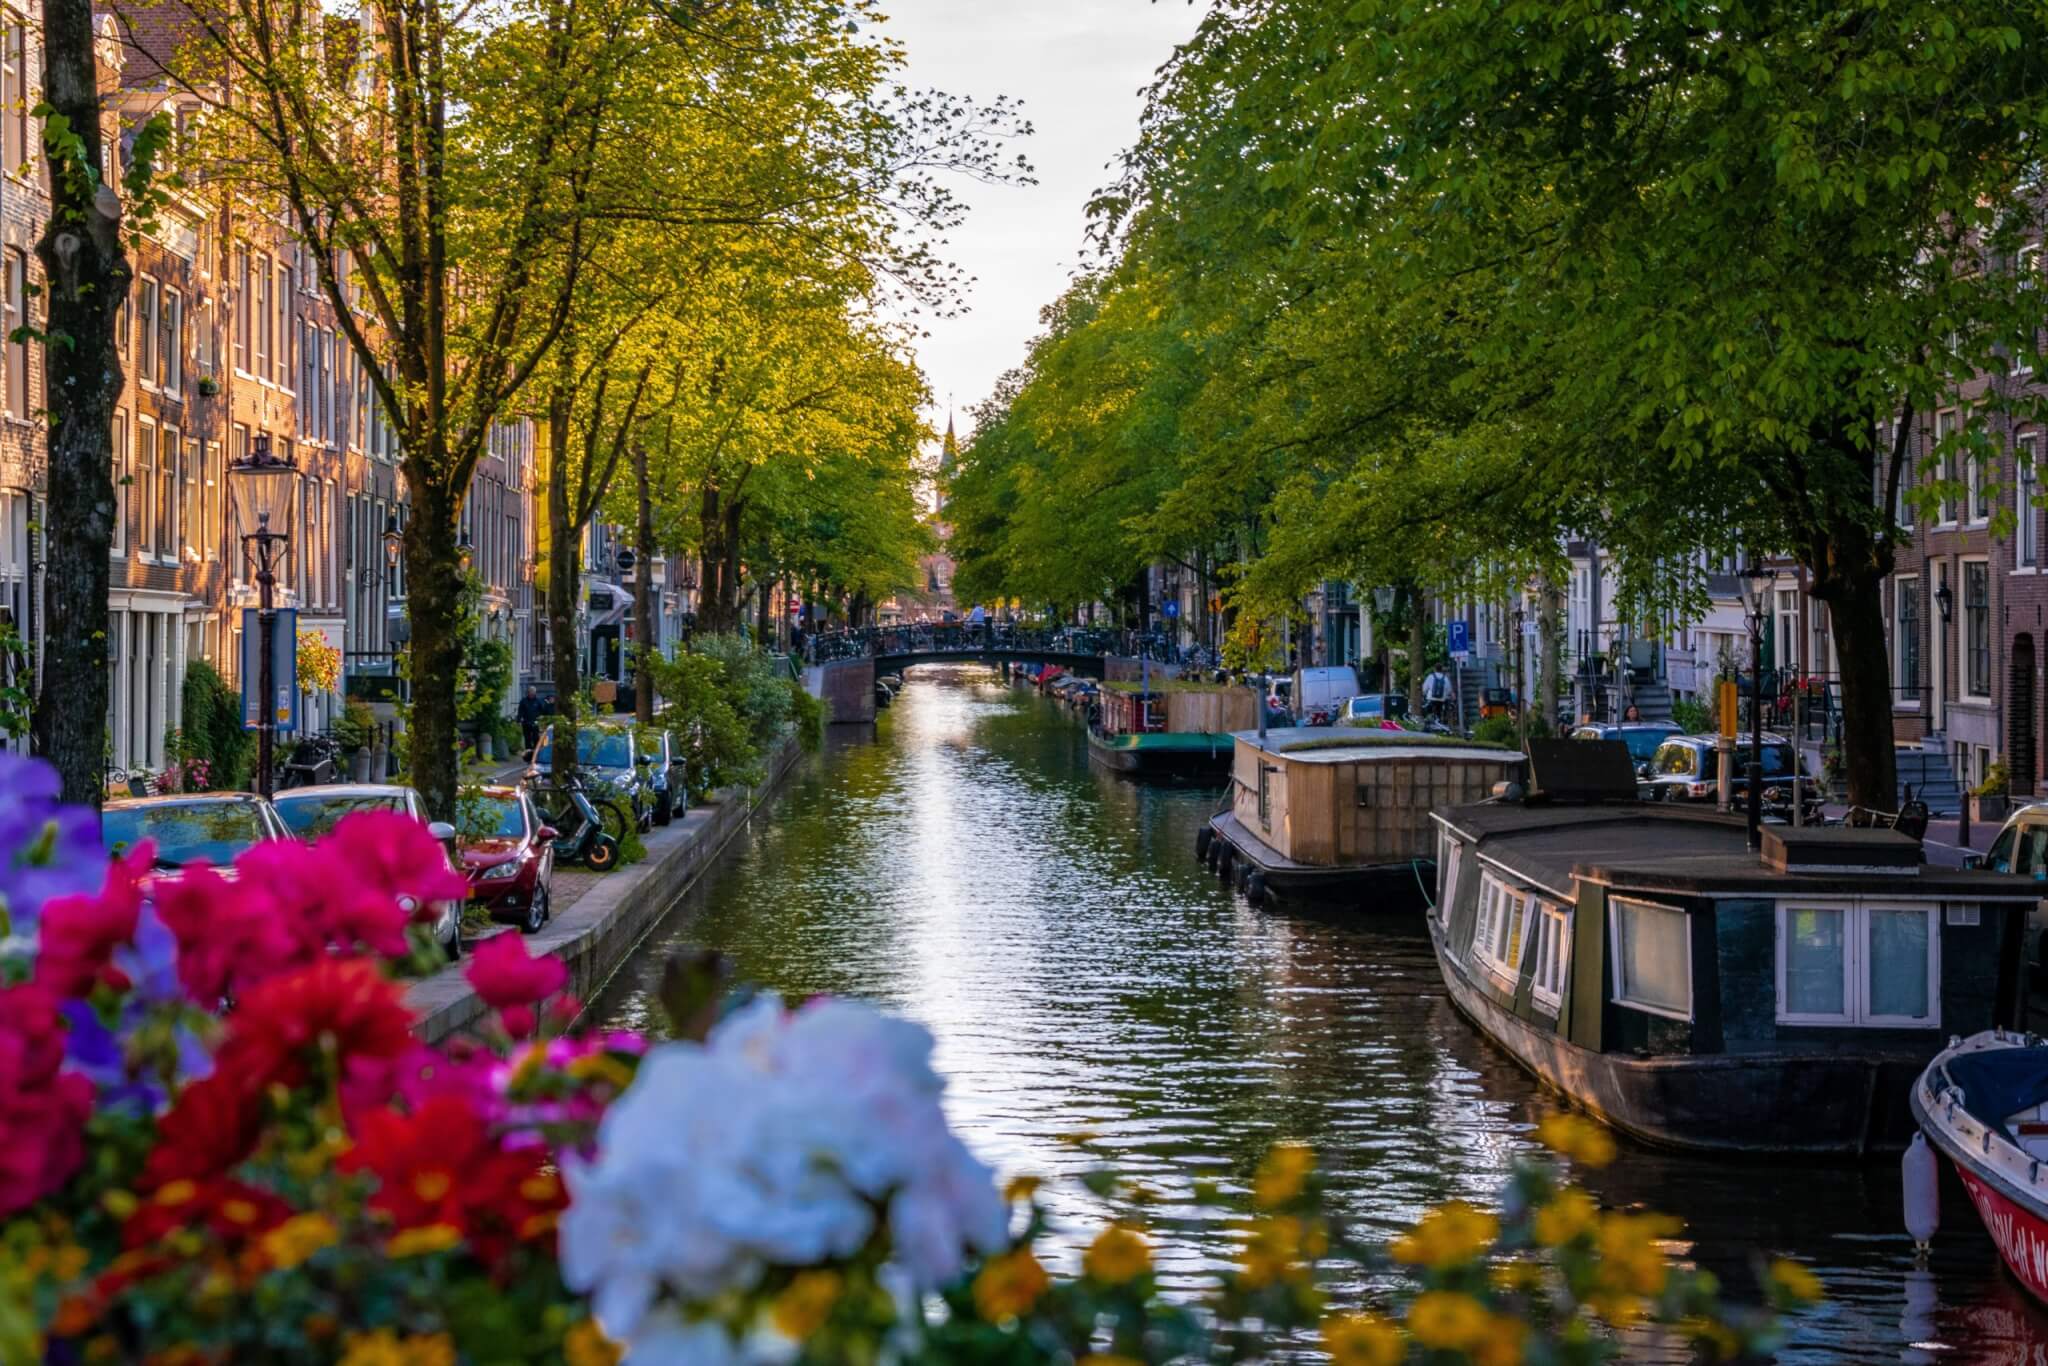 A canal in Amsterdam